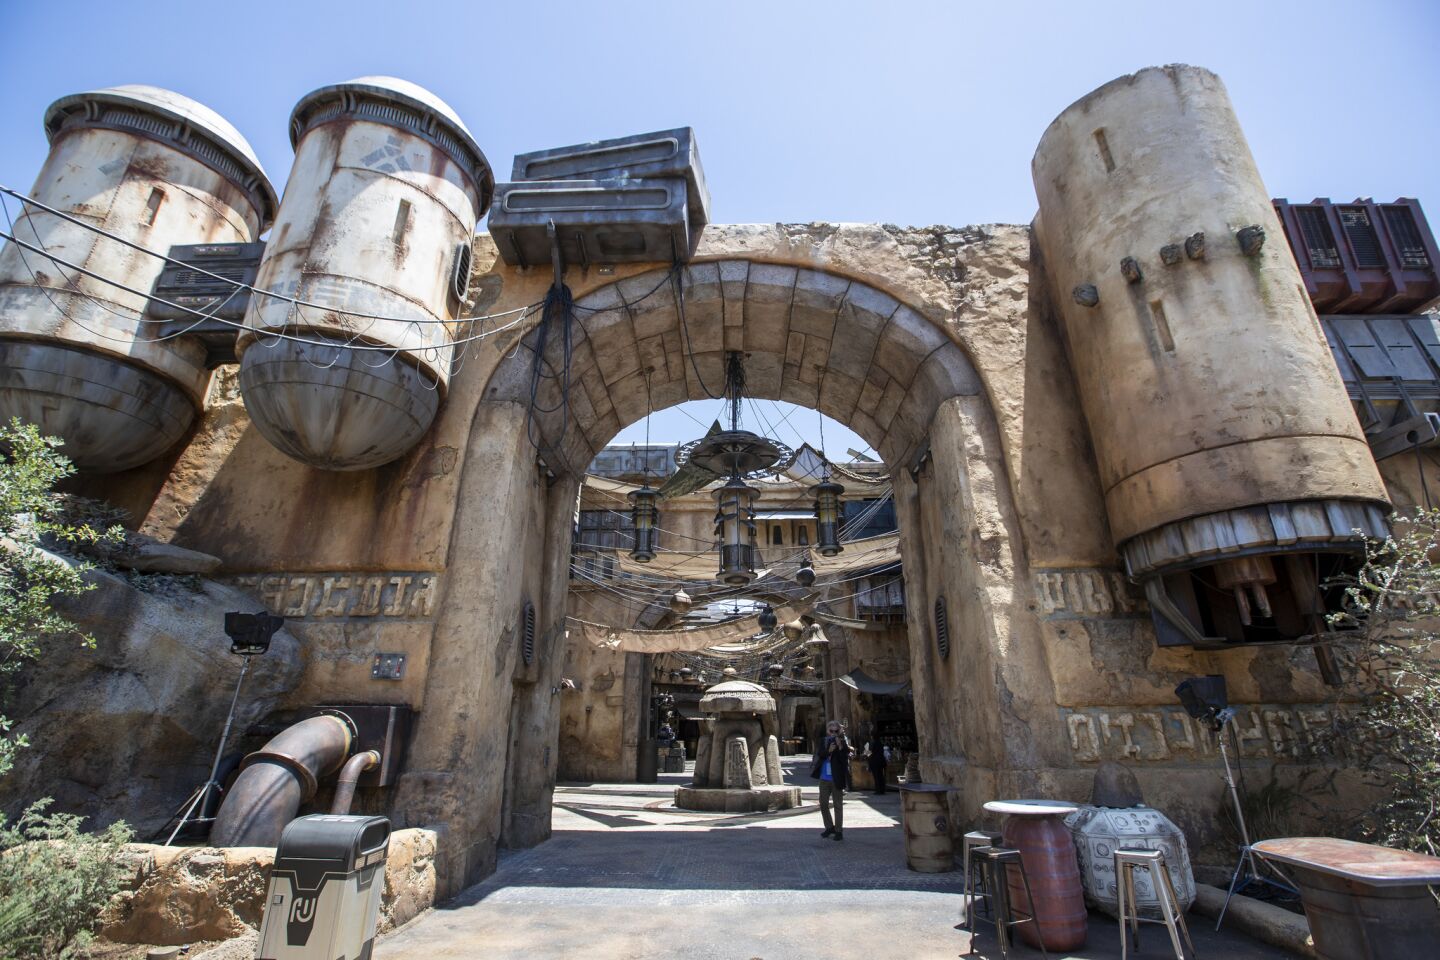 A view of the Marketplace at Star Wars: Galaxy's Edge.